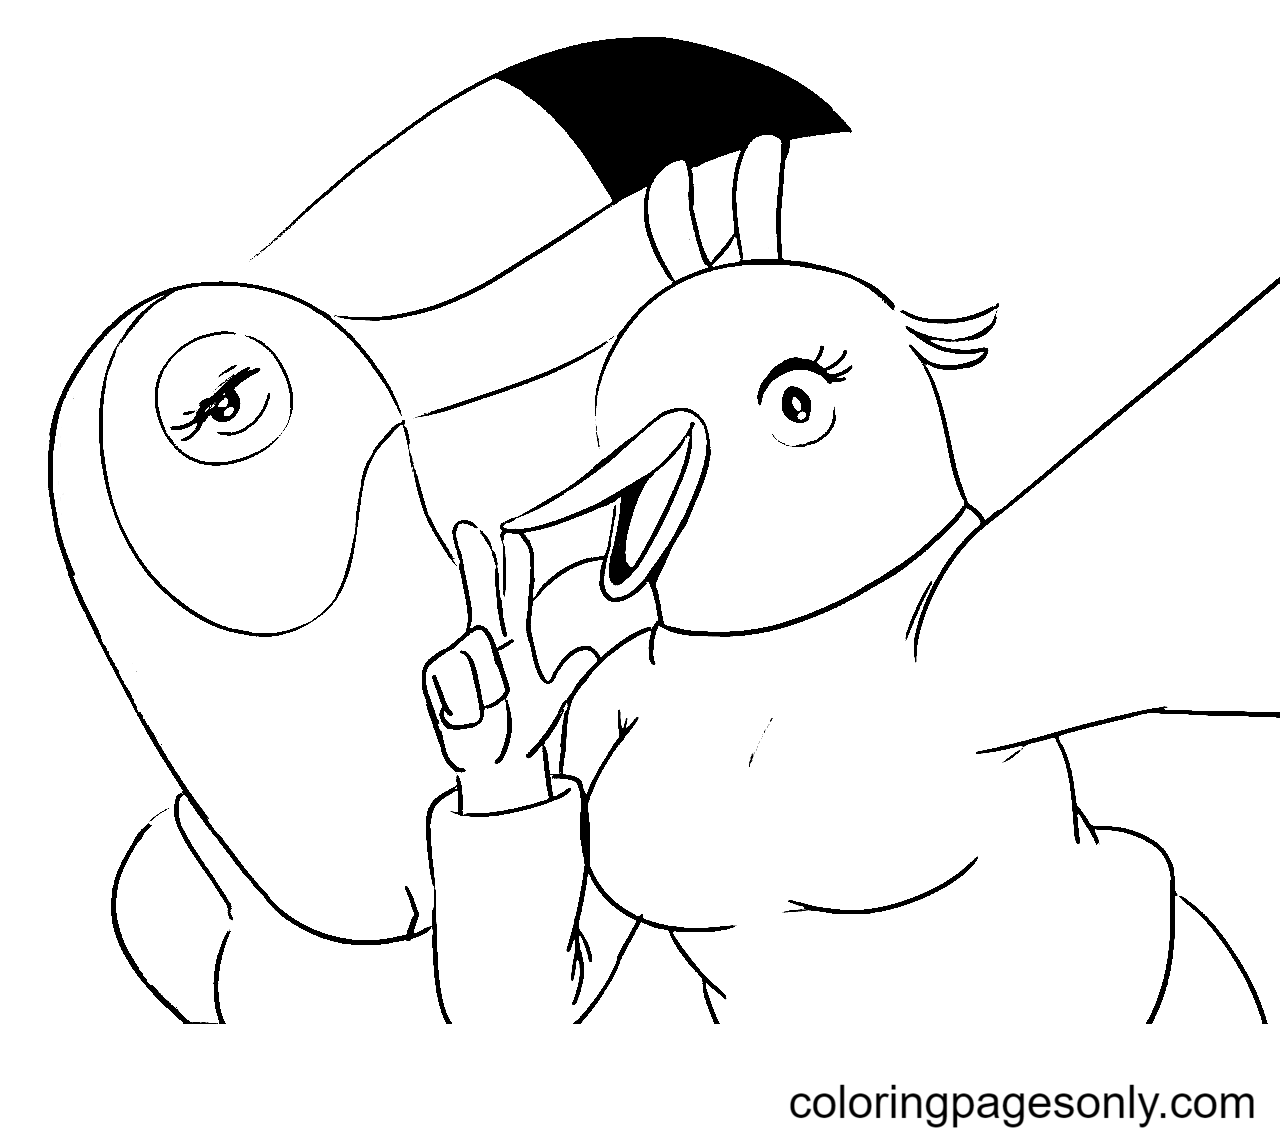 Tuca and Bertie Posing Coloring Pages